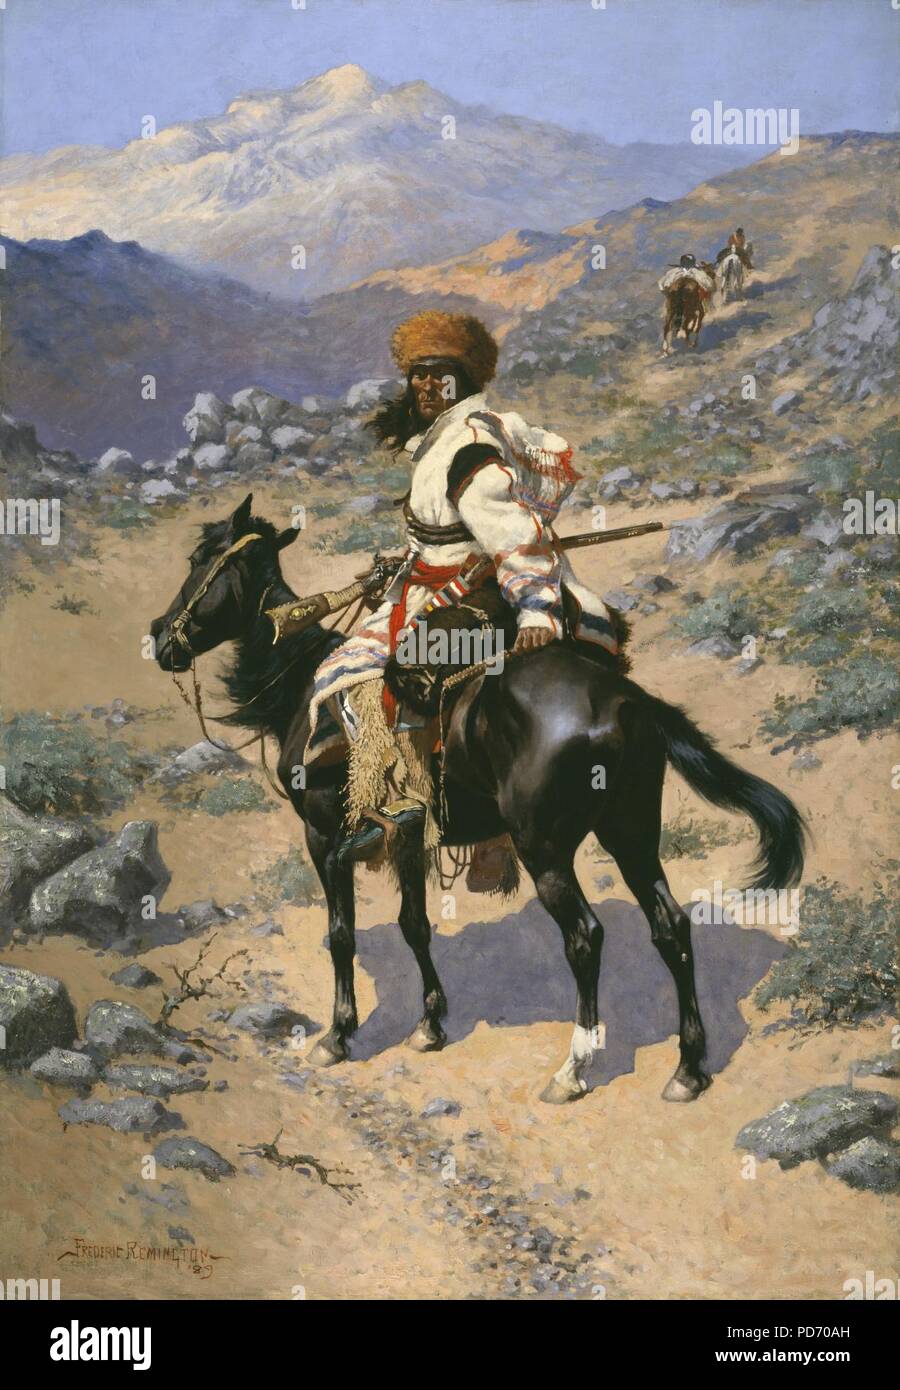 An Indian Trapper, 1889, by Frederic S. Remington. Stock Photo